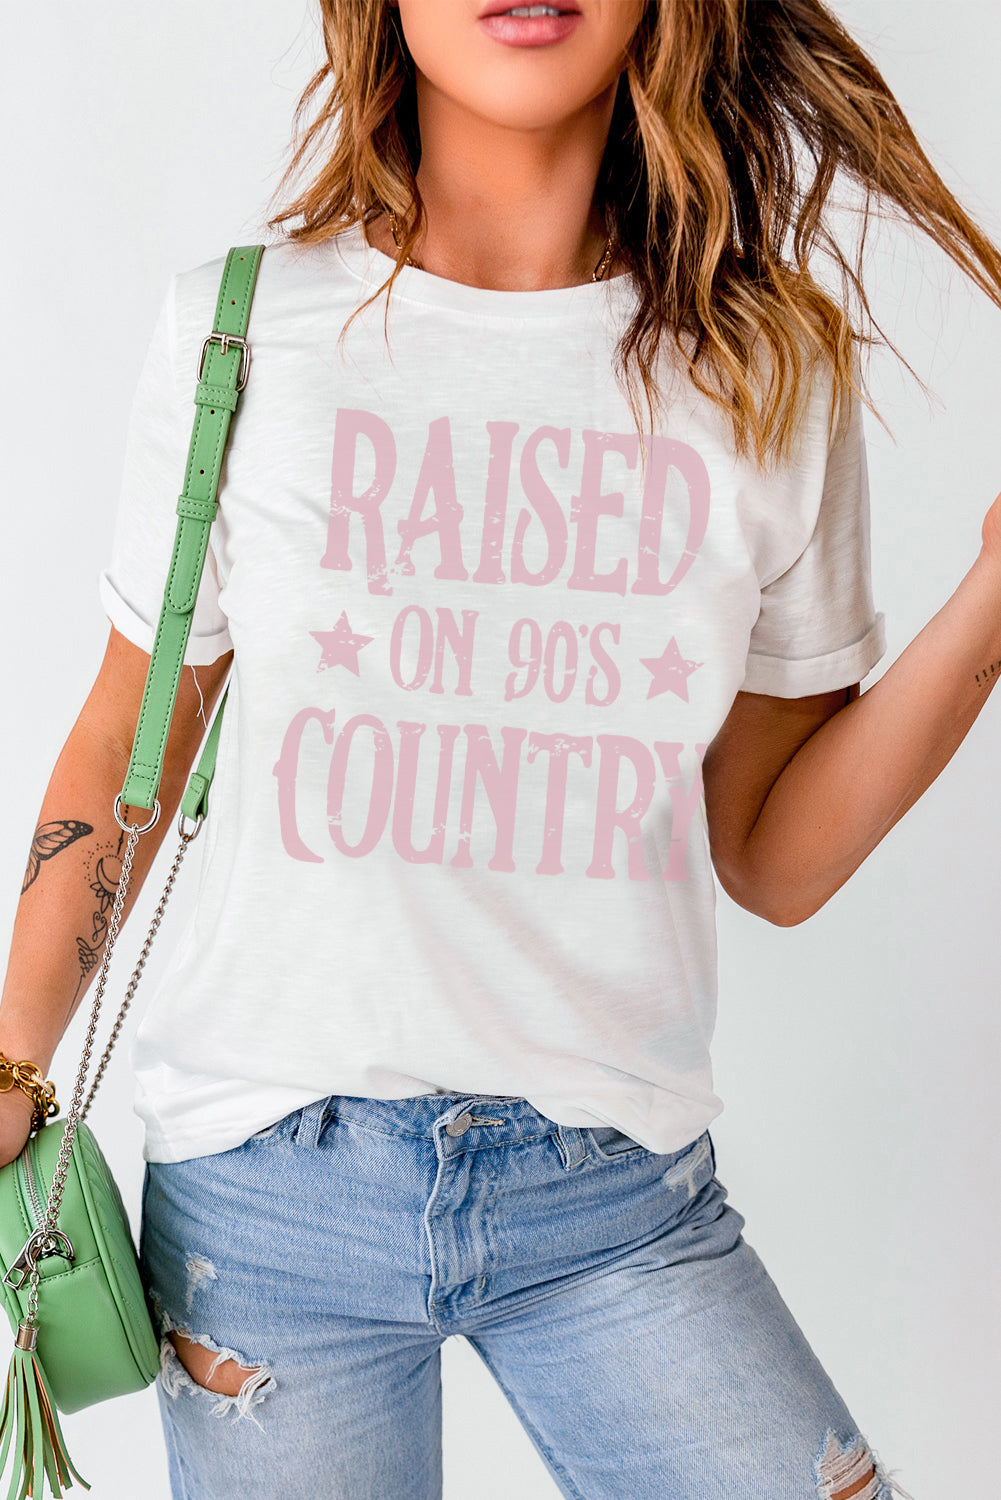 "RAISED ON 90'S COUNTRY" Graphic T-Shirt